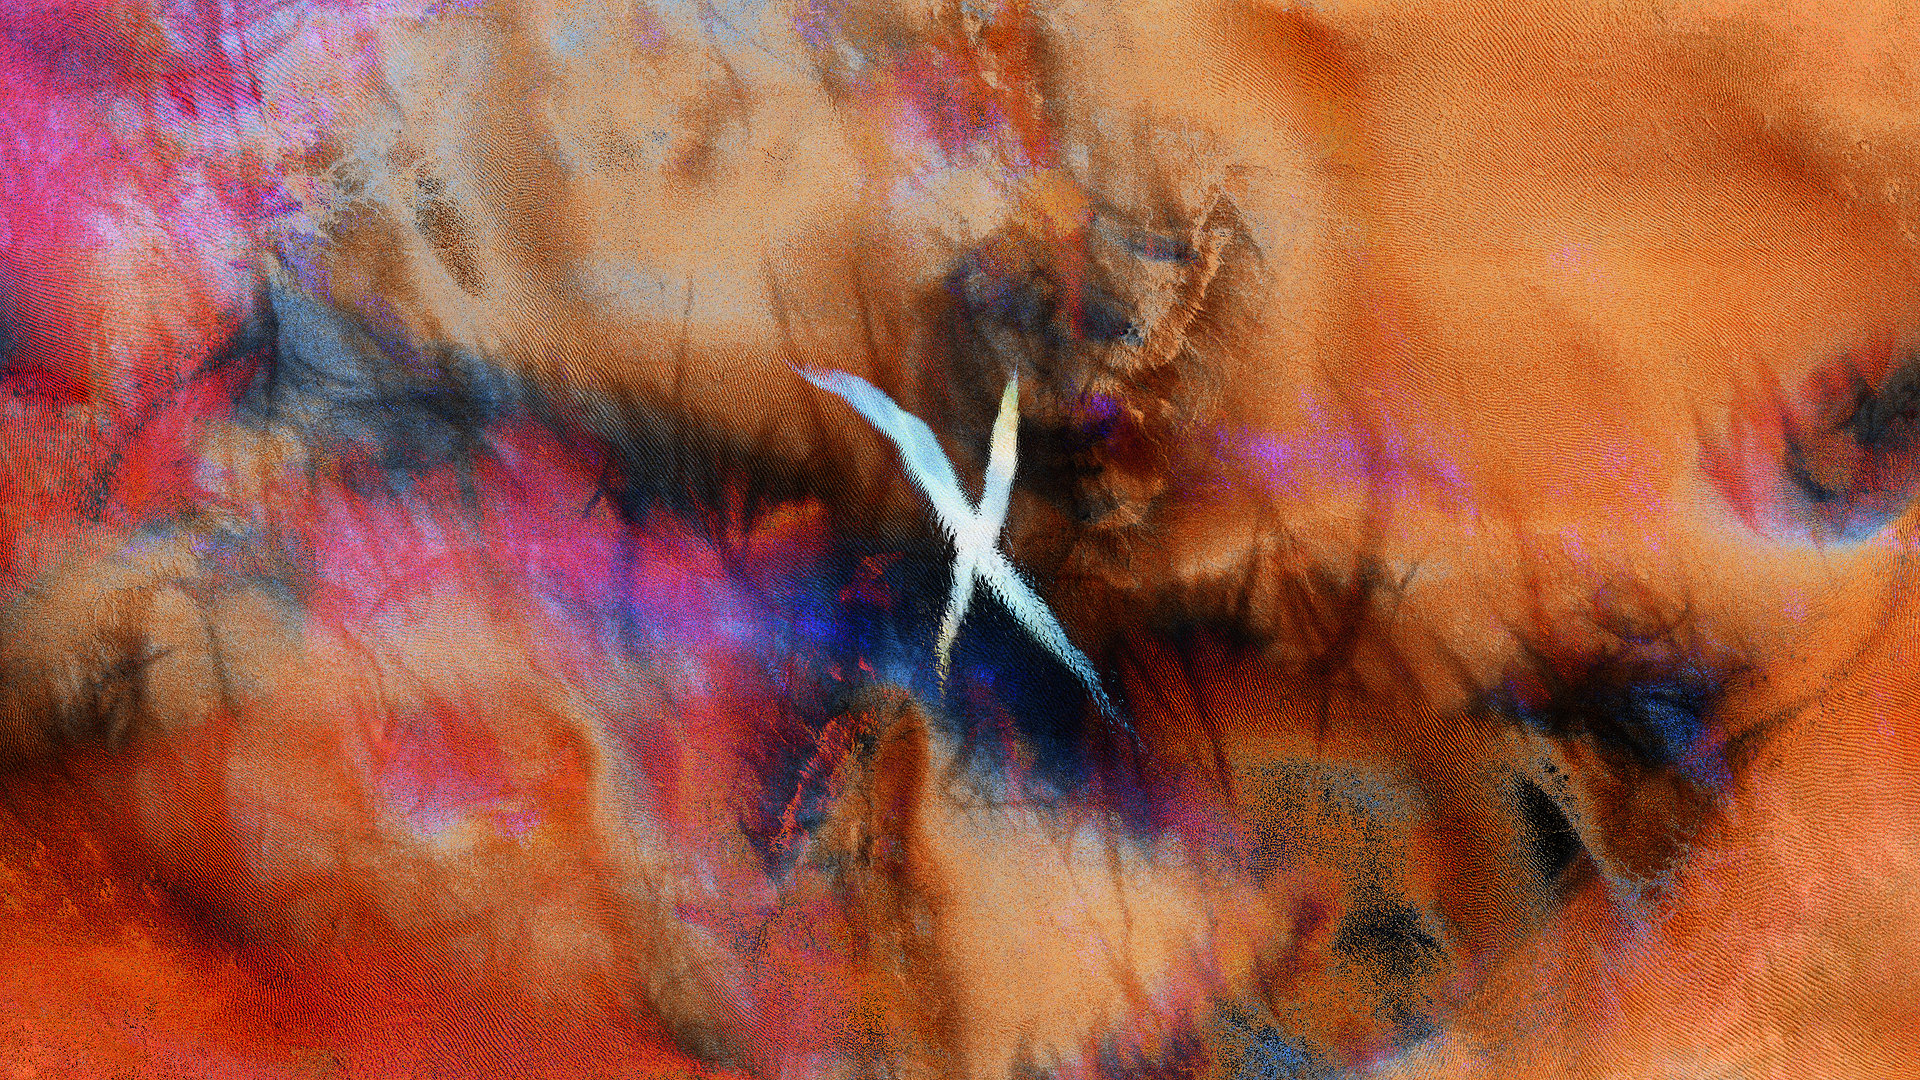 X by Herm the Younger